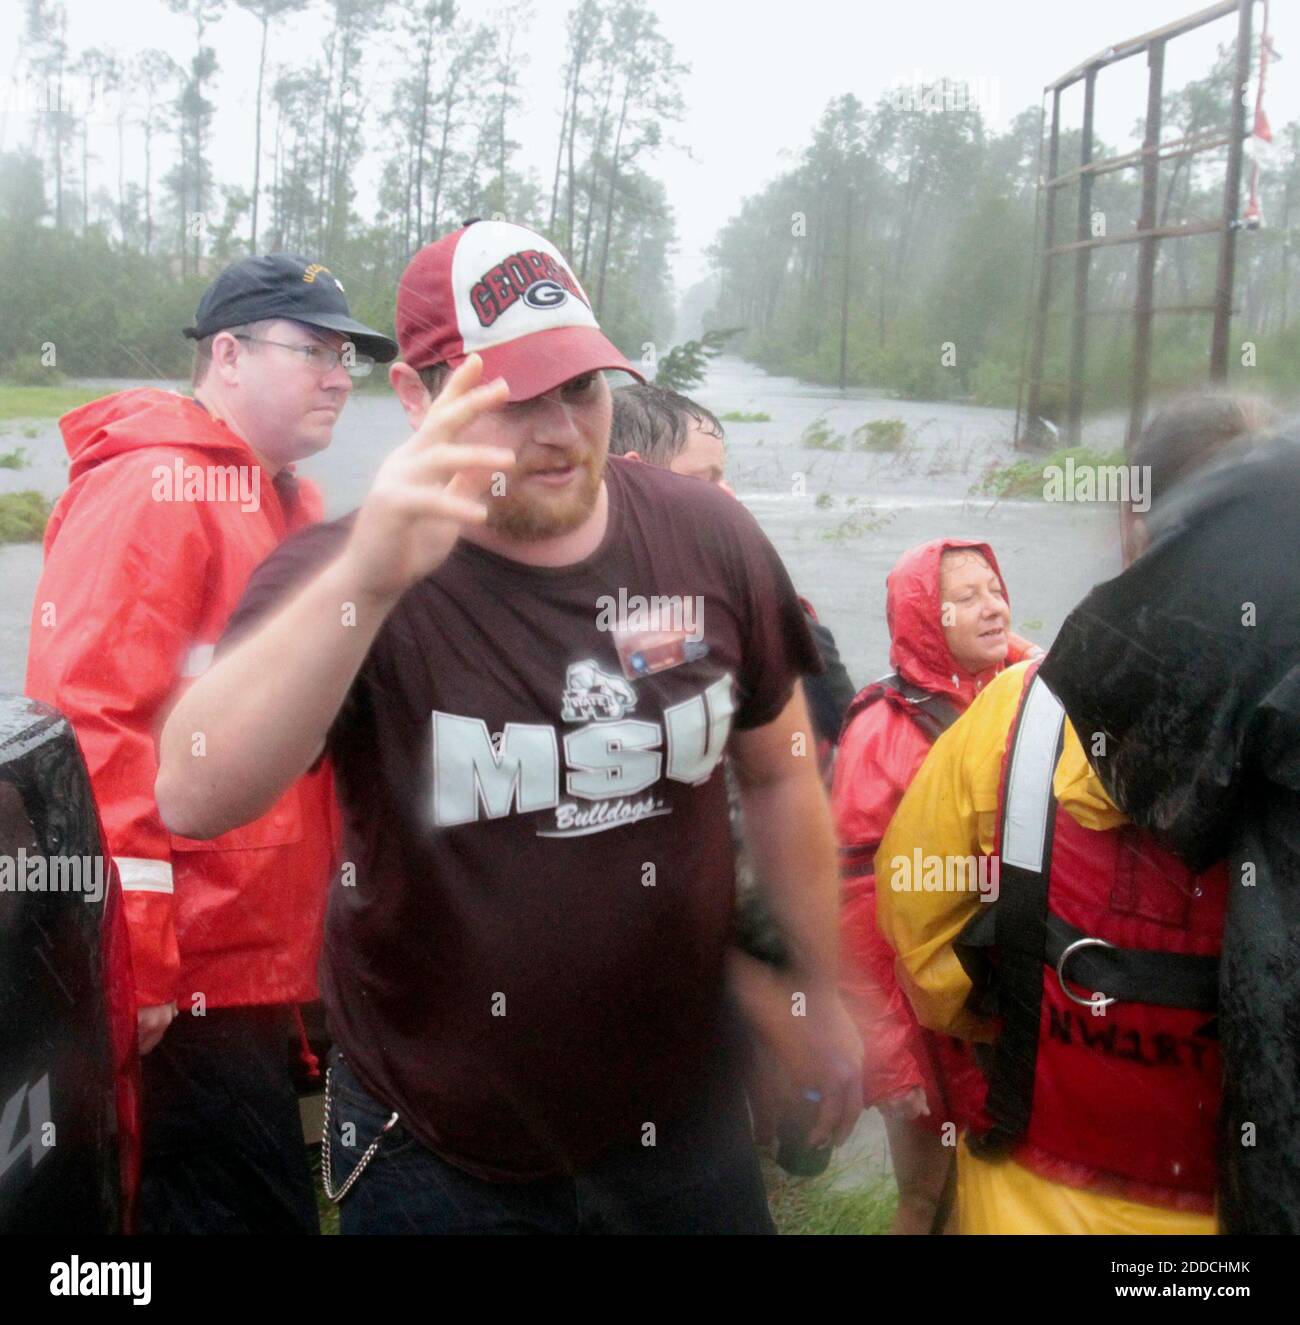 NO FILM, NO VIDEO, NO TV, NO DOCUMENTARY - Anthony Allen, center, thanks the Swift Water Rescue Team after he and two other employees of WQRZ radio station were rescued from the flooded station in the Shoreline Park area of Bay St. Louis, Mississippi, during Hurricane Isaac on Wednesday, August 29, 2012. Photo by John Fitzhugh/Biloxi Sun Herald/MCT/ABACAPRESS.COM Stock Photo